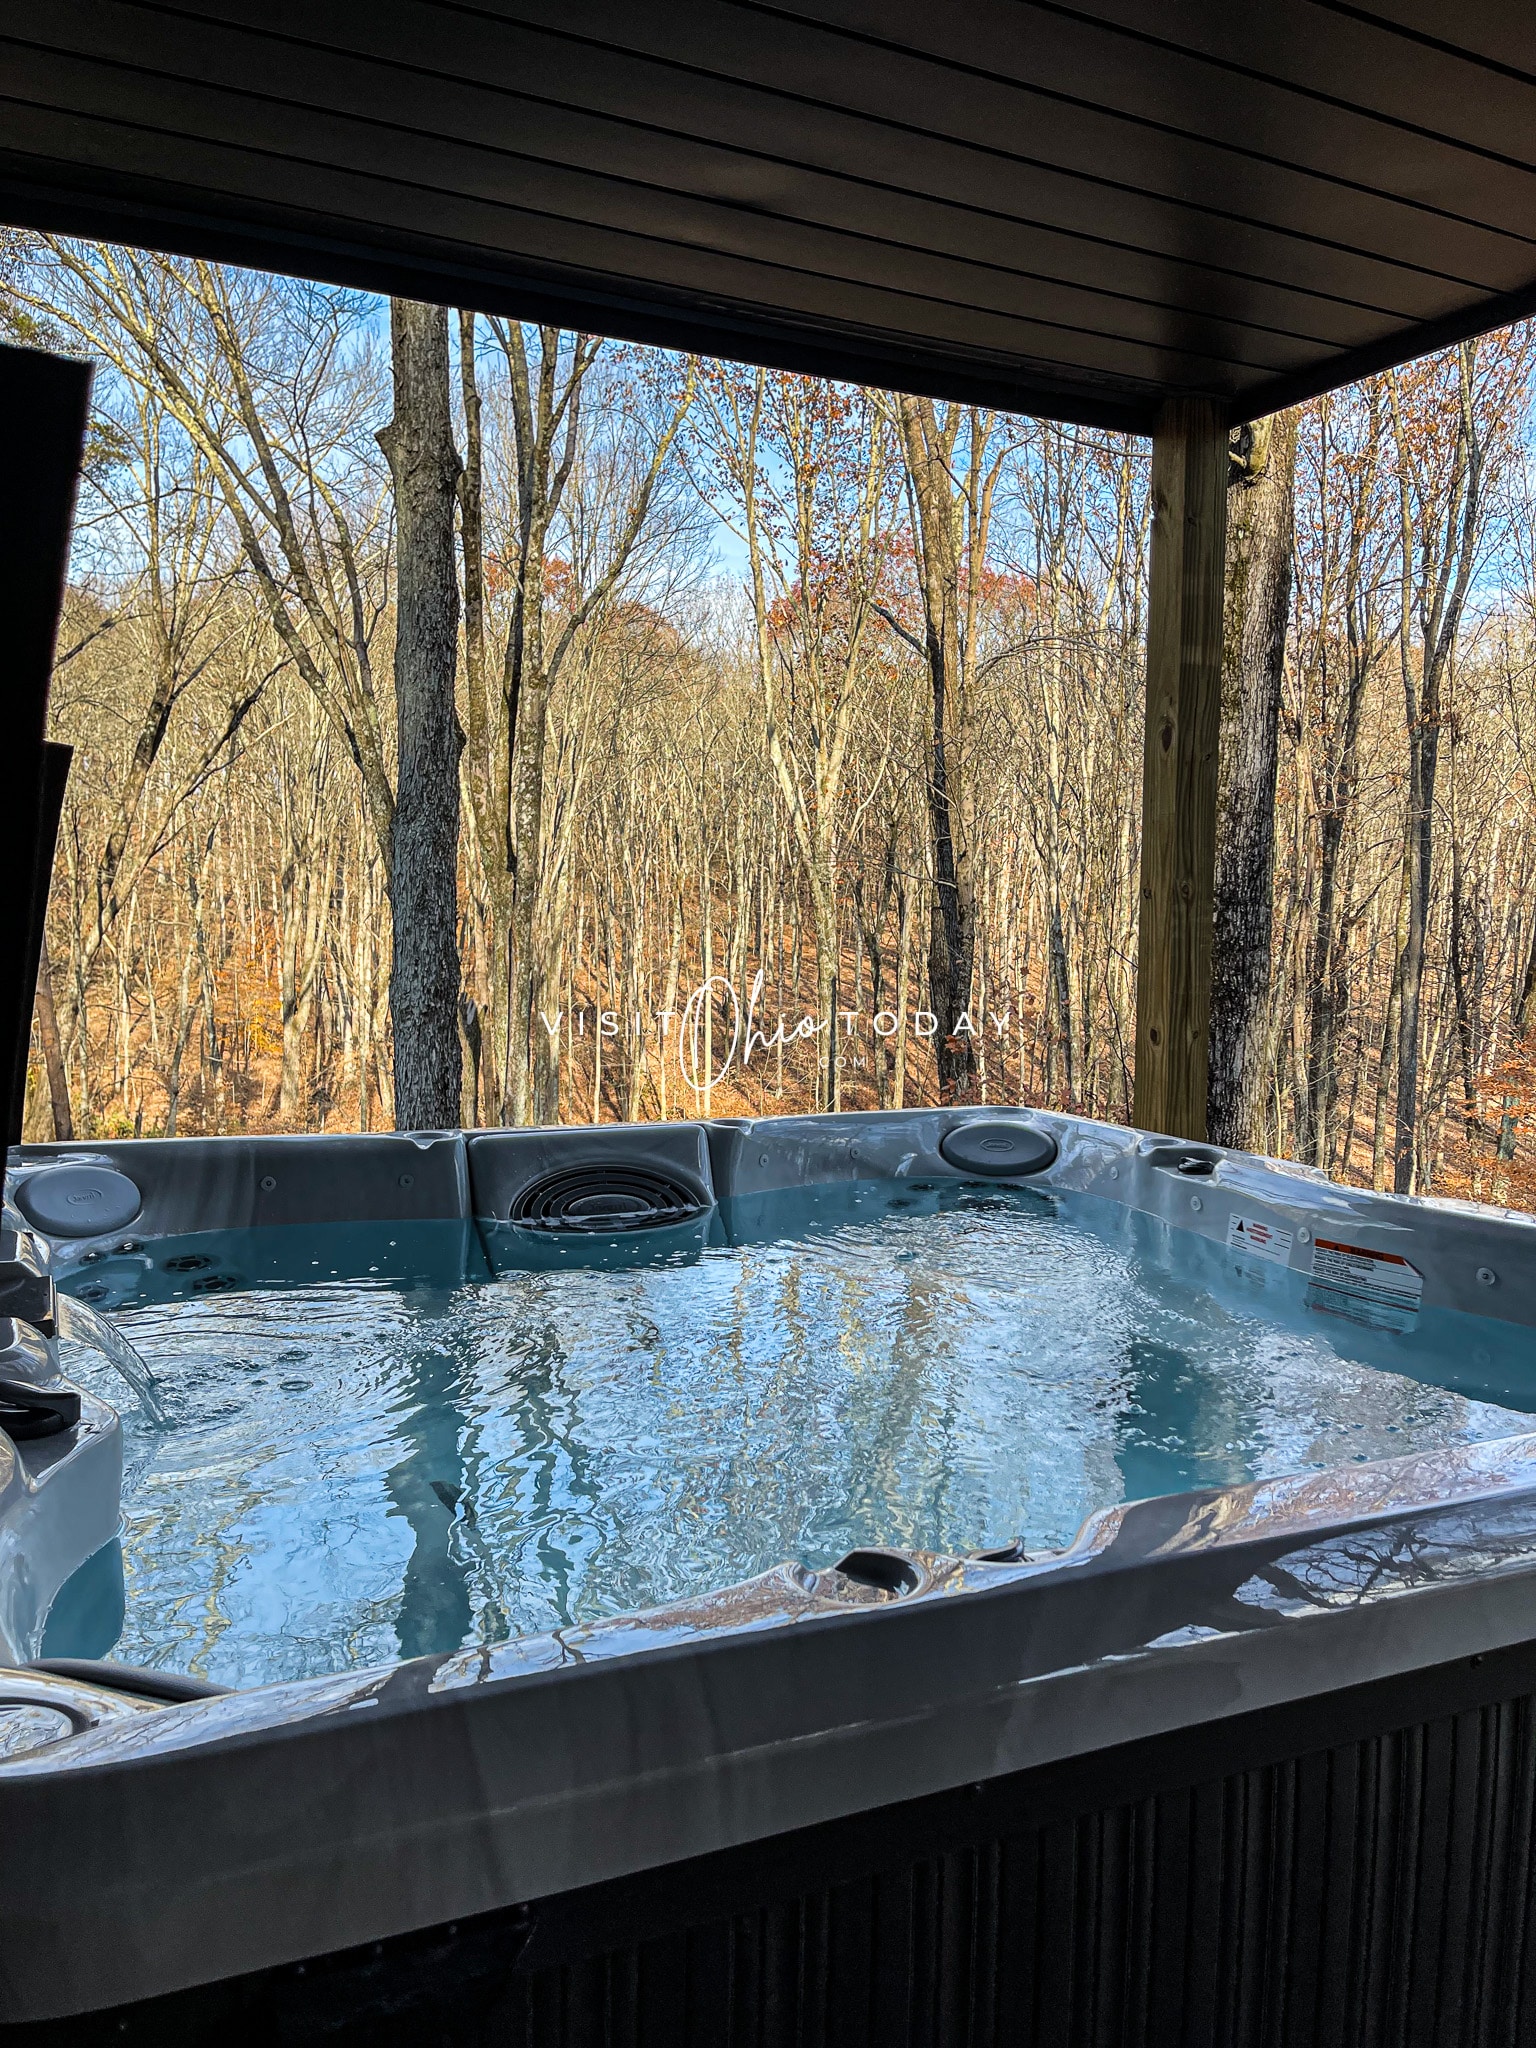 hot tub that is open and filled with water, looking out to the forest, trees don't have many leaves Photo credit: Cindy Gordon of VisitOhioToday.com